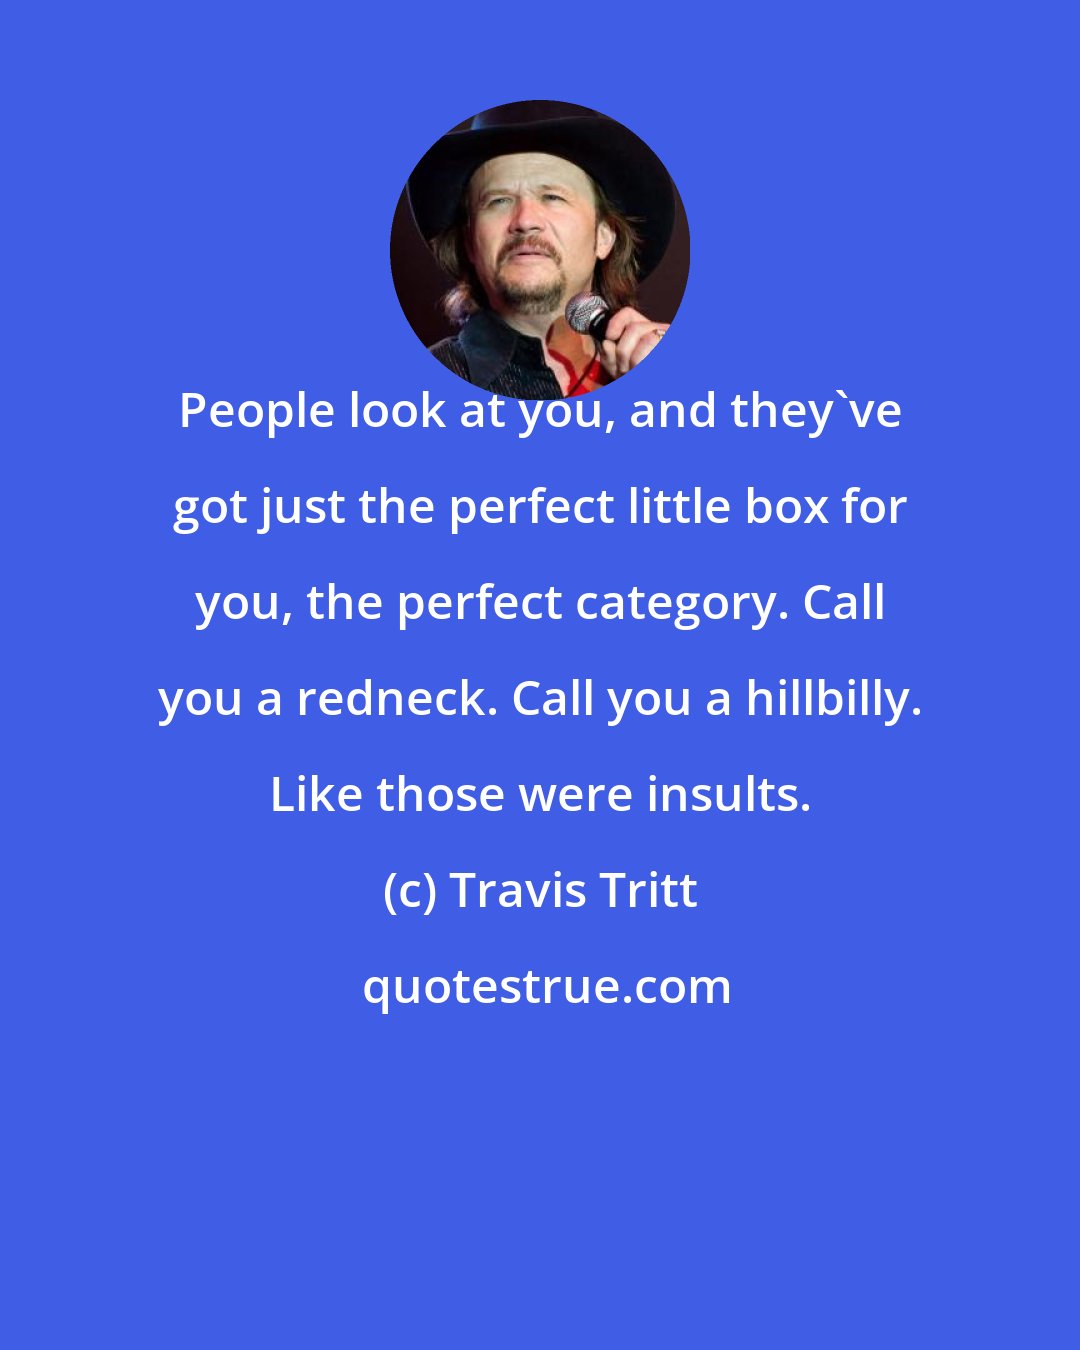 Travis Tritt: People look at you, and they've got just the perfect little box for you, the perfect category. Call you a redneck. Call you a hillbilly. Like those were insults.